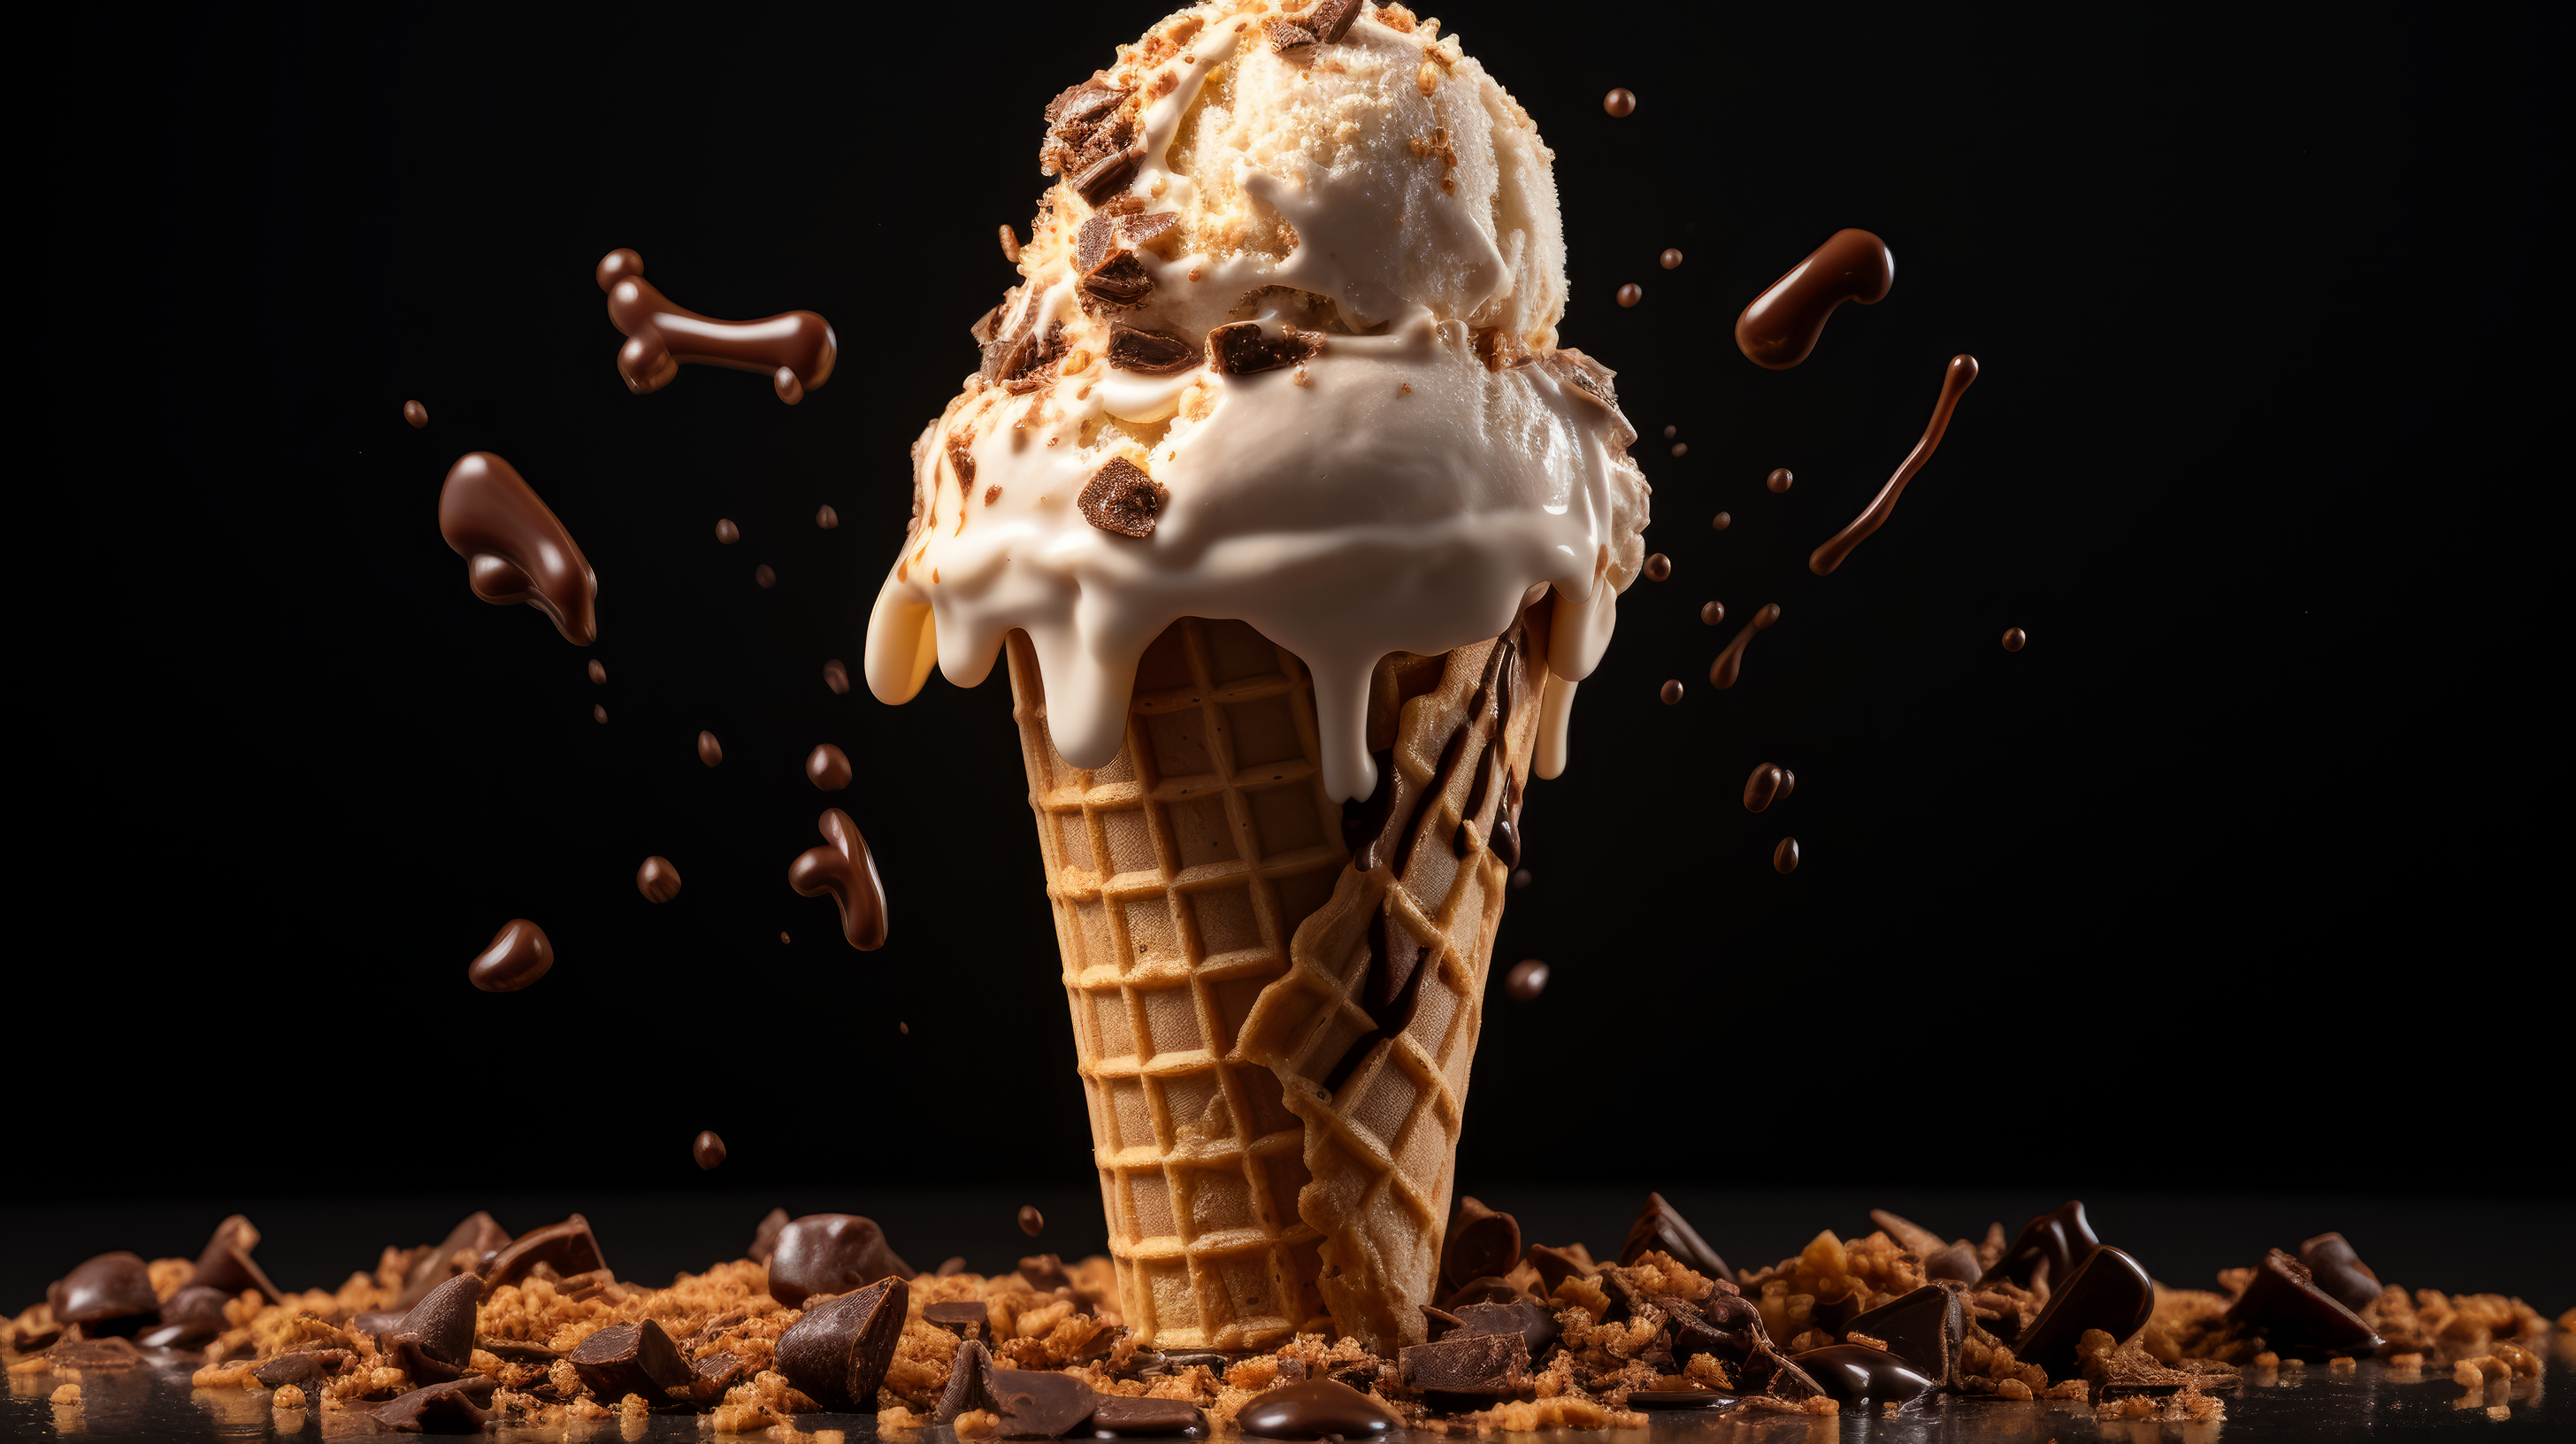 HD Wallpaper of melting ice cream cone with chocolate splashes and cookie crumbles on a dark background, AI art.